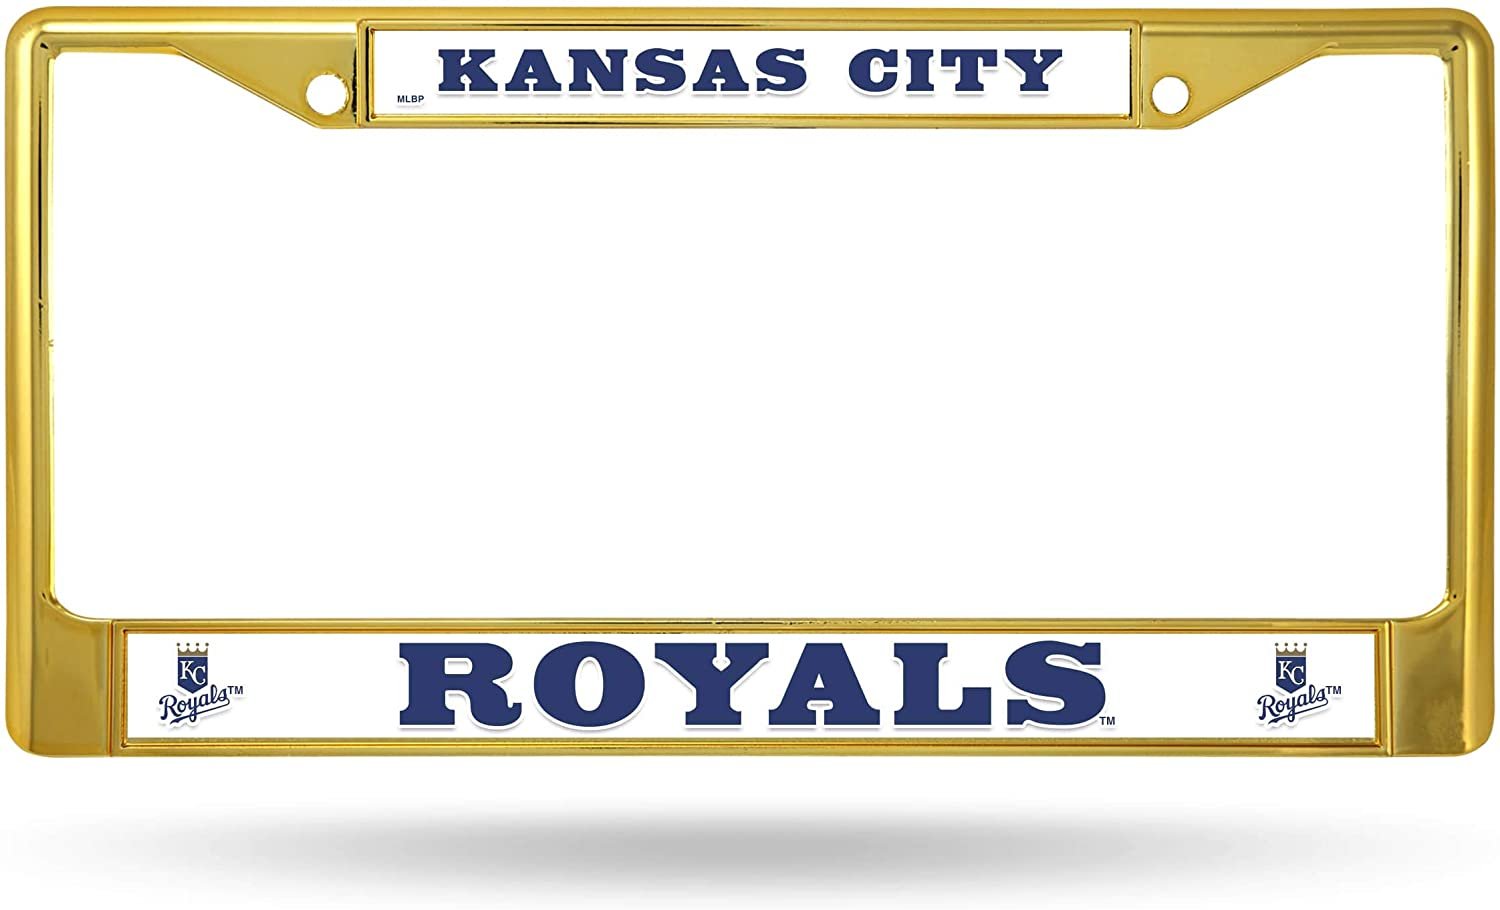 Kansas City Royals Gold Metal License Plate Frame Chrome Tag Cover, 12x6 Inch